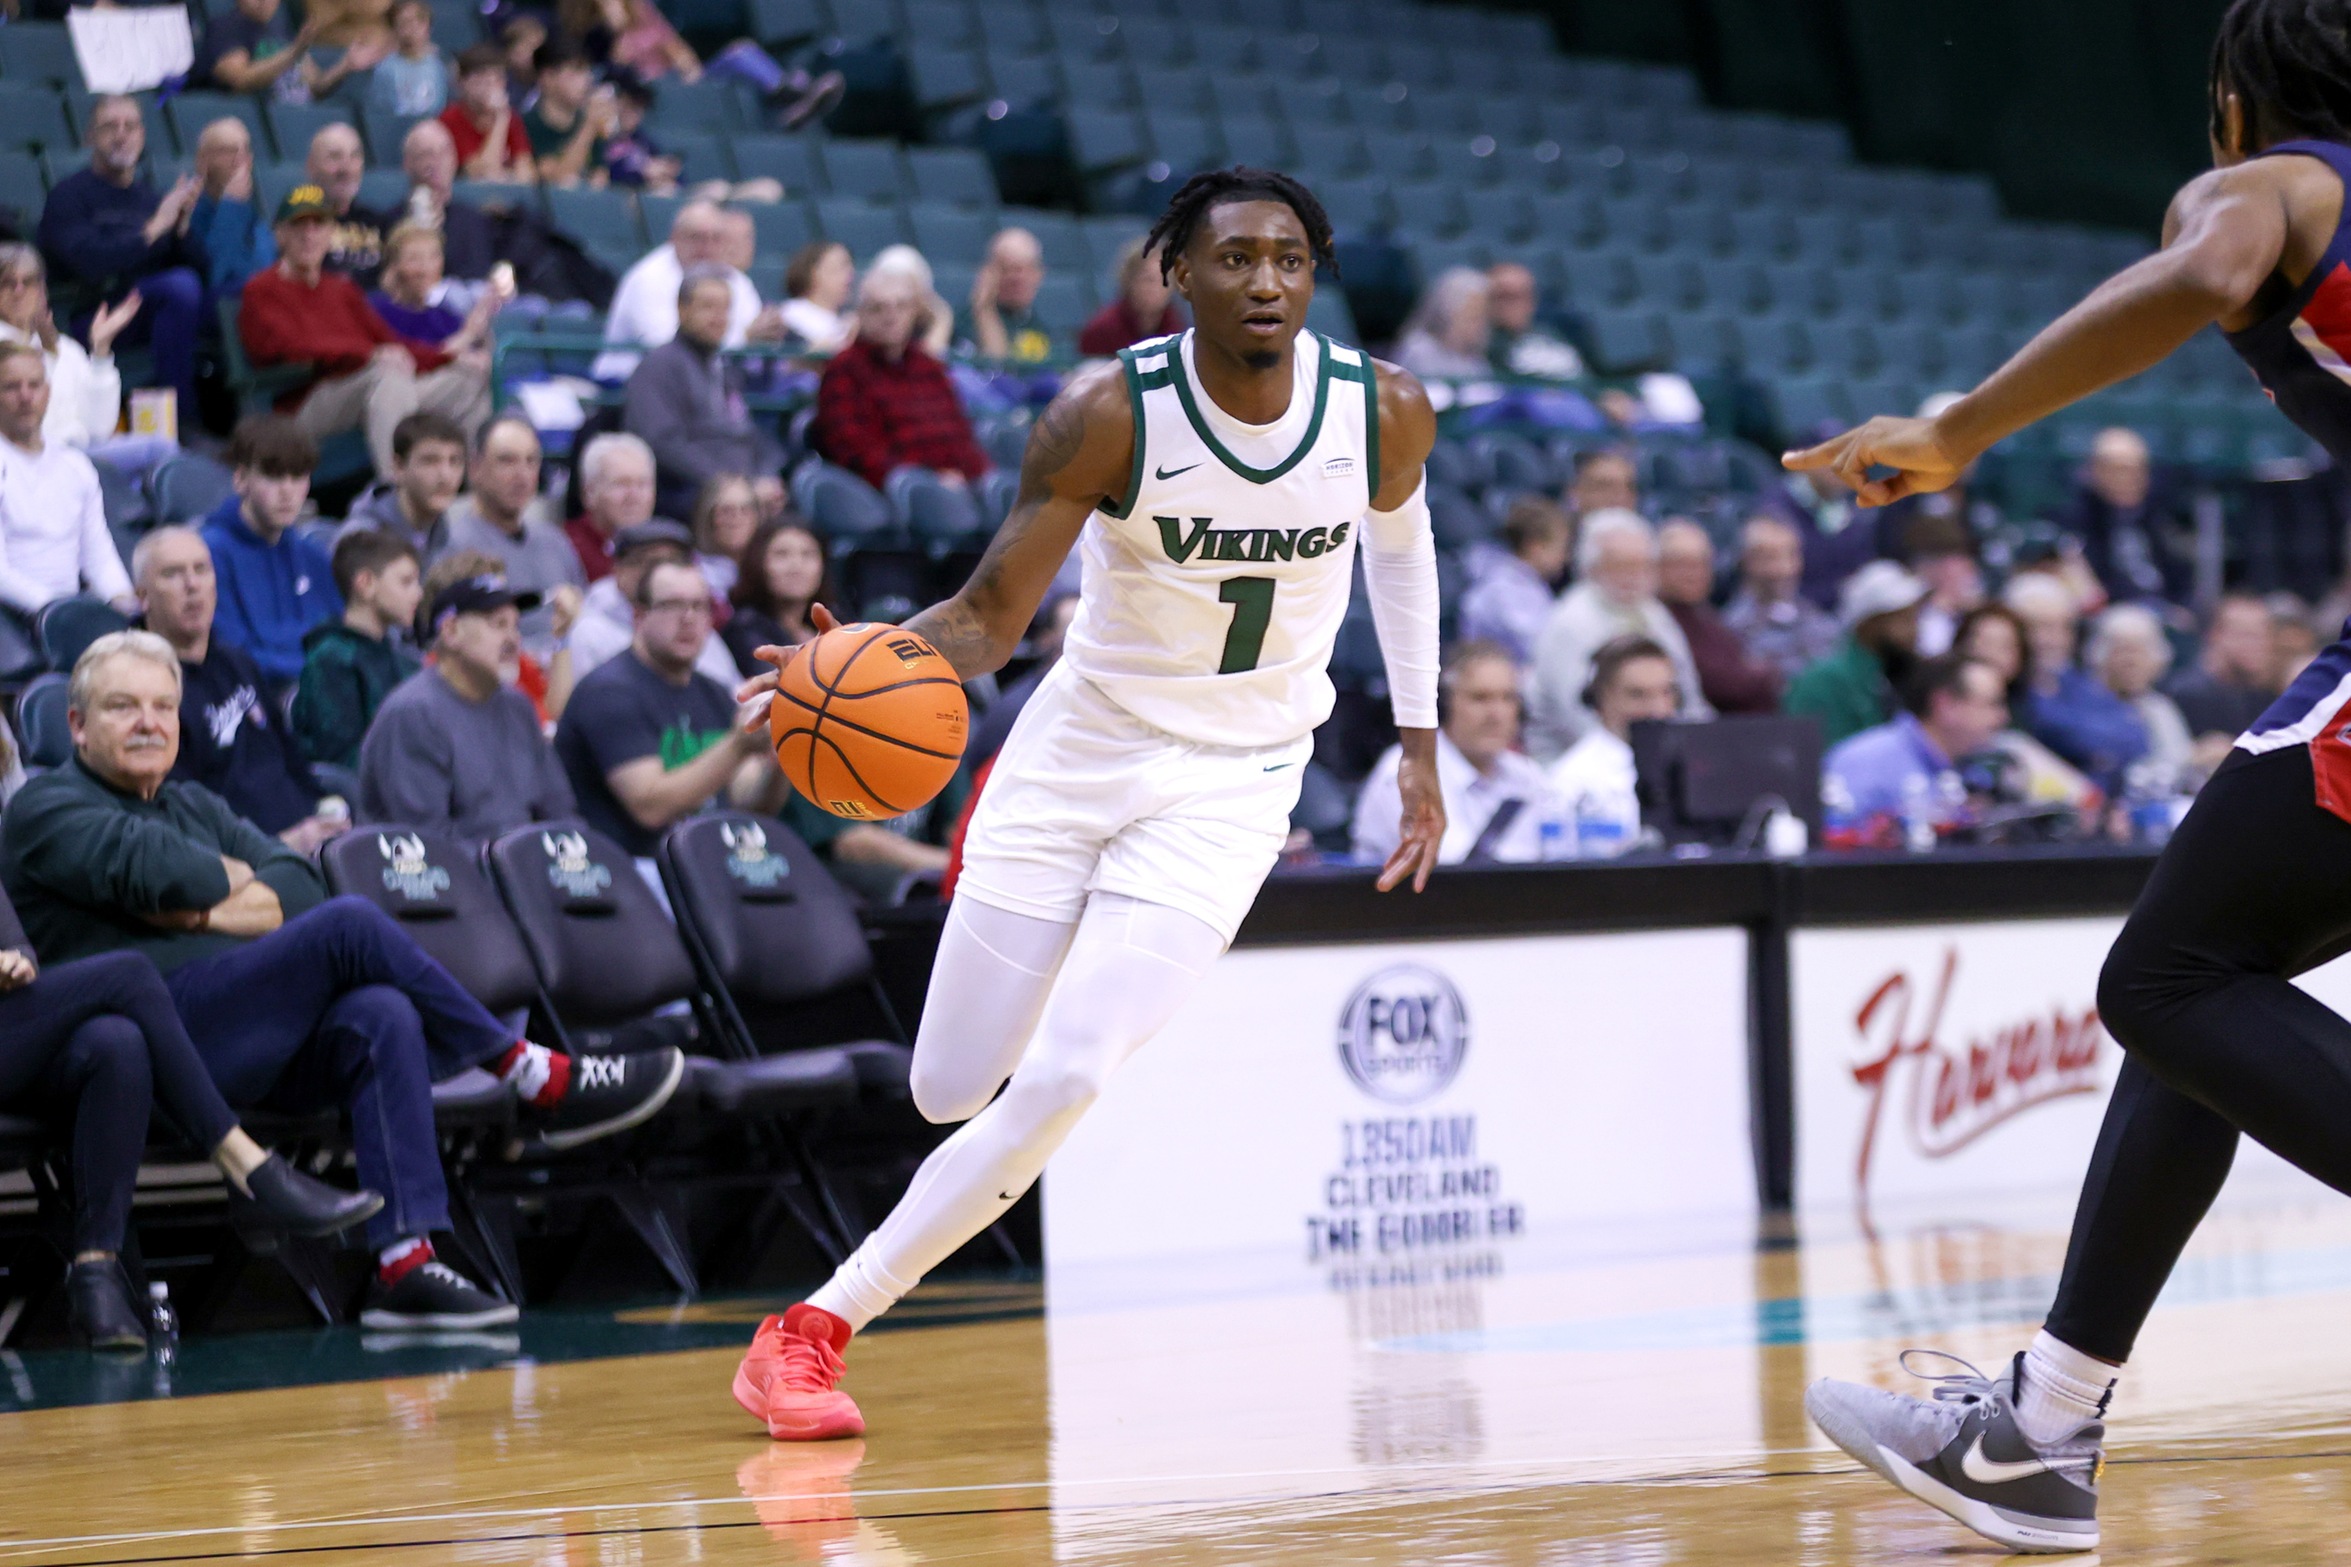 Cleveland State Men’s Basketball Earns First #HLMBB Victory over Detroit Mercy